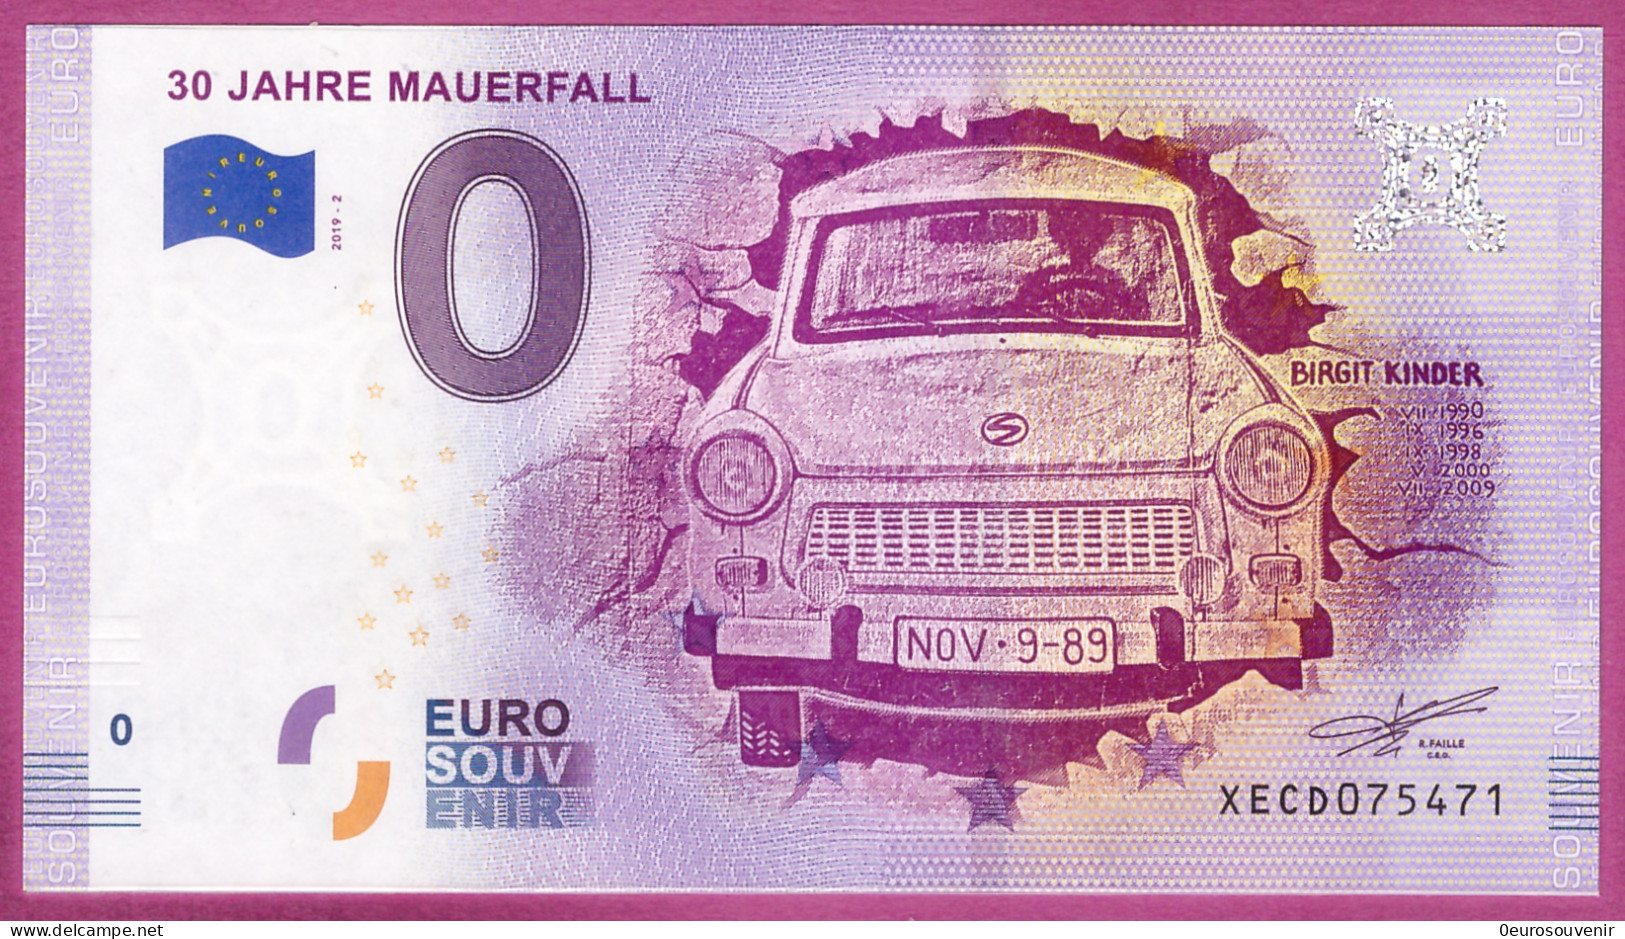 0-Euro XECD 2019-2 30 JAHRE MAUERFALL - R 3.2 IMPRESSUM 2-ZEILIG - Private Proofs / Unofficial